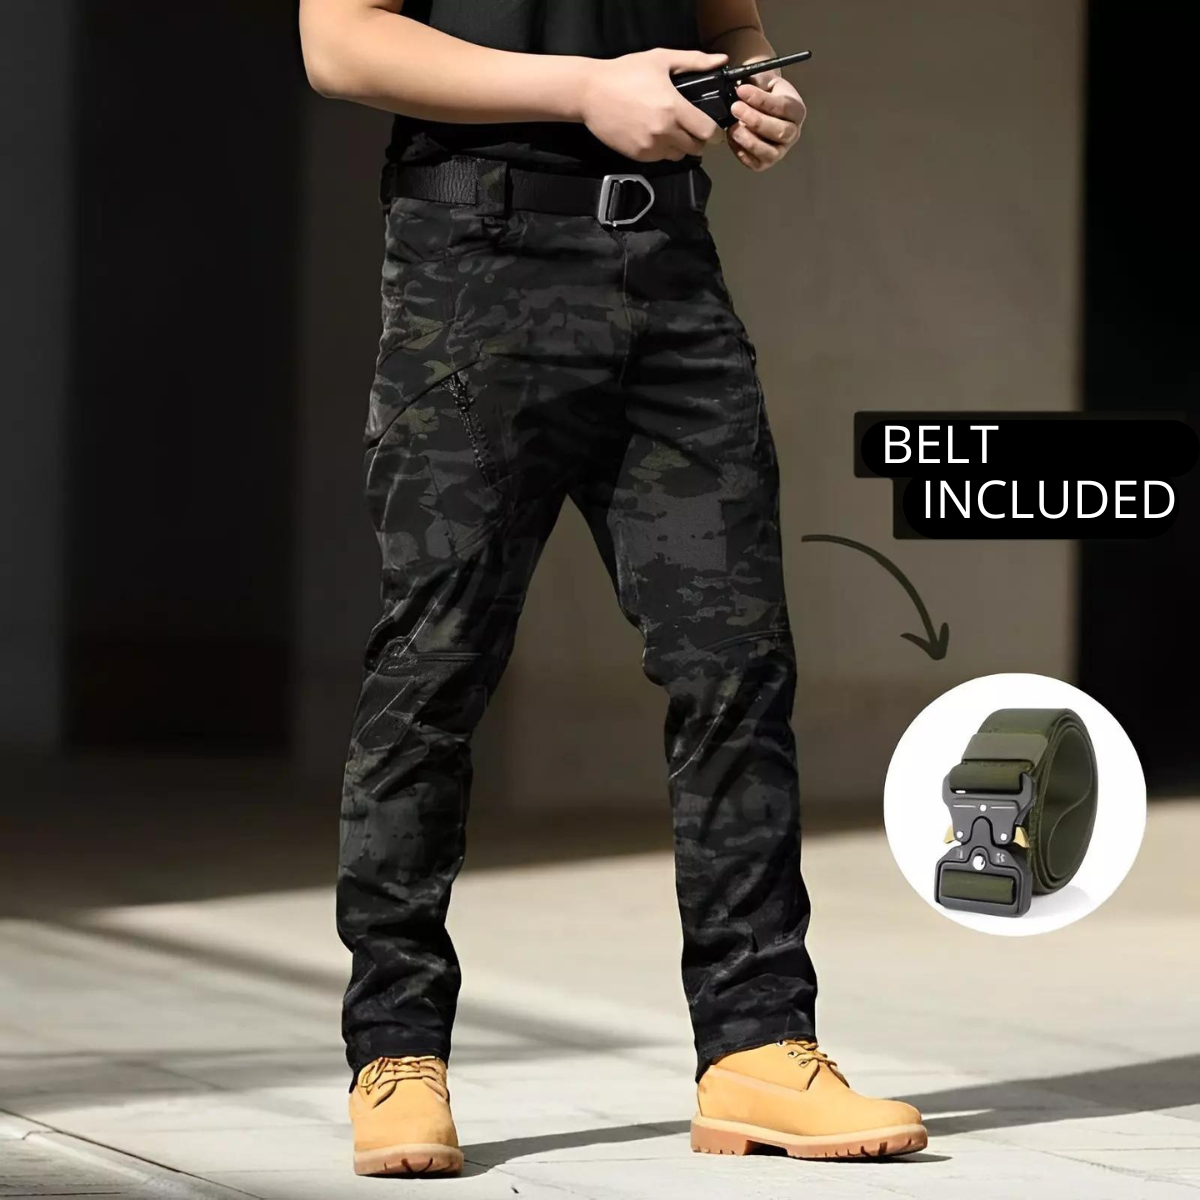 Military Tactical Ultra Resistant and Waterproof Pants + GIFT Belt